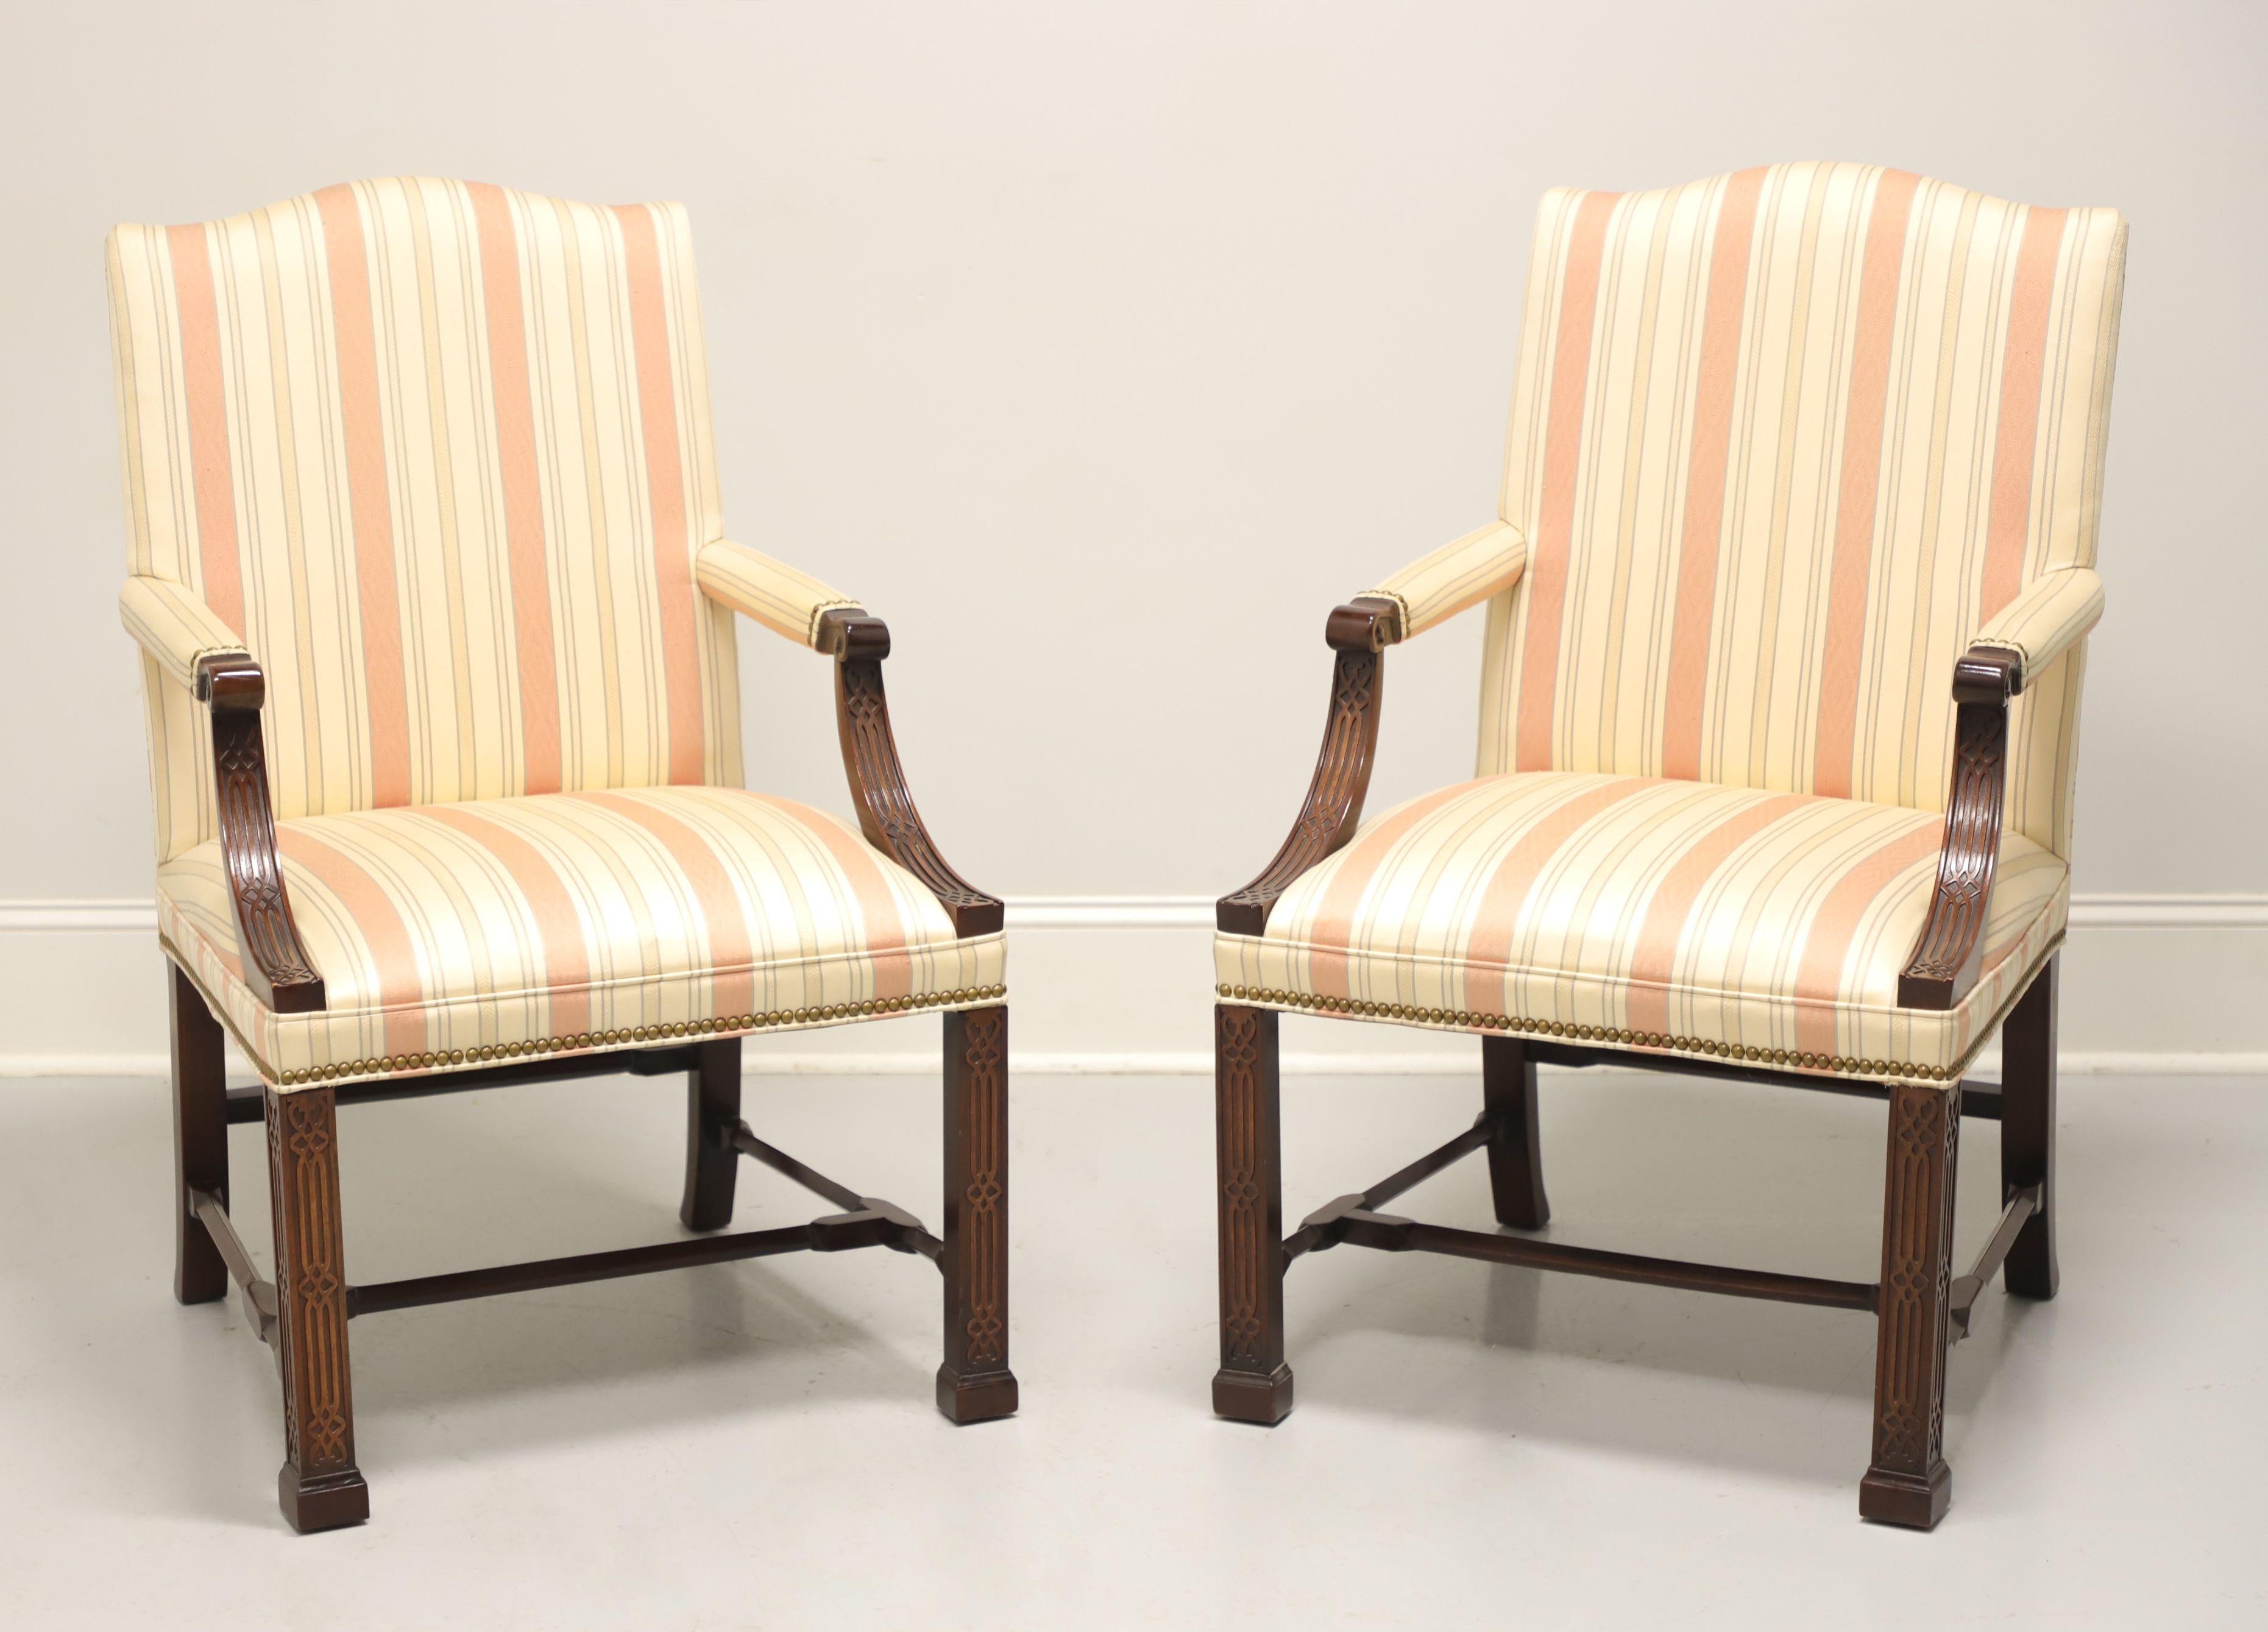 HICKORY CHAIR Wentworth Mahogany Chippendale Style Fretwork Armchairs - Pair 6